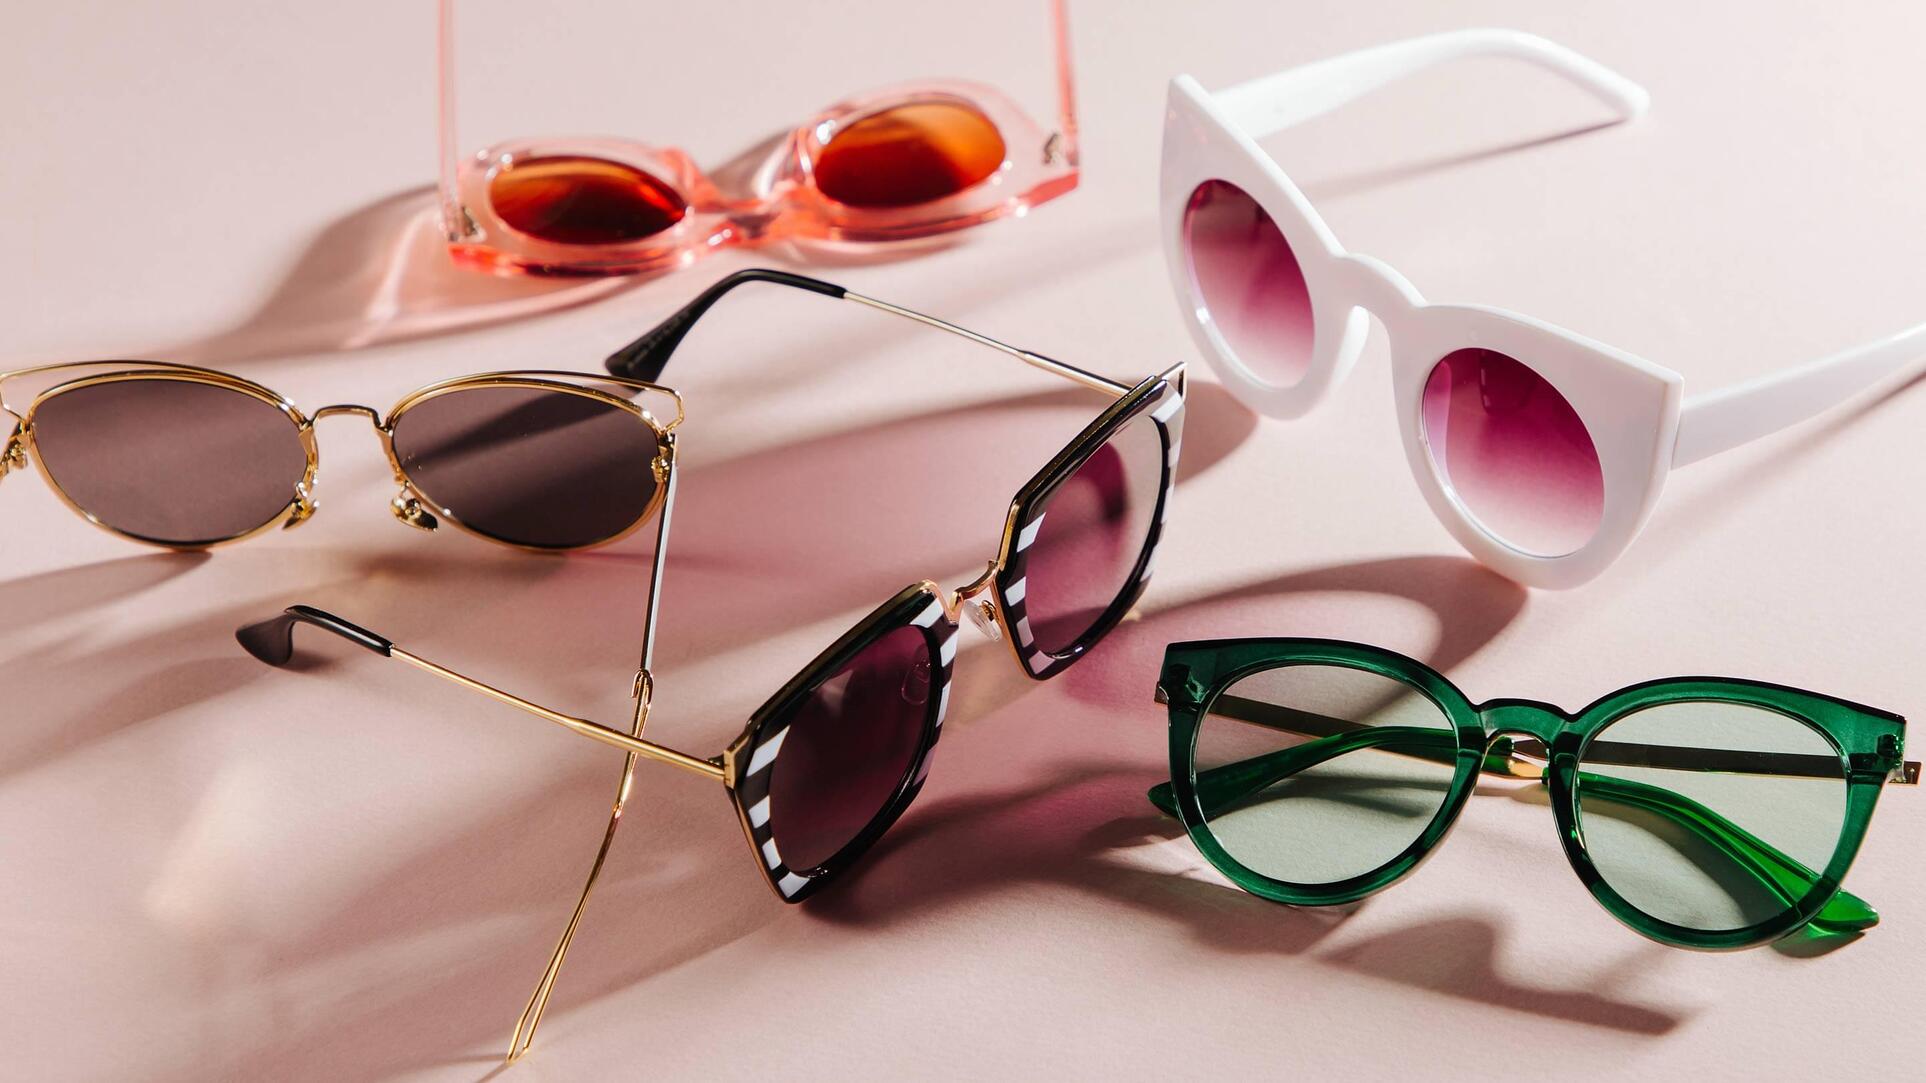 Consider light lens tints for wearing colorful eyewear indoors.